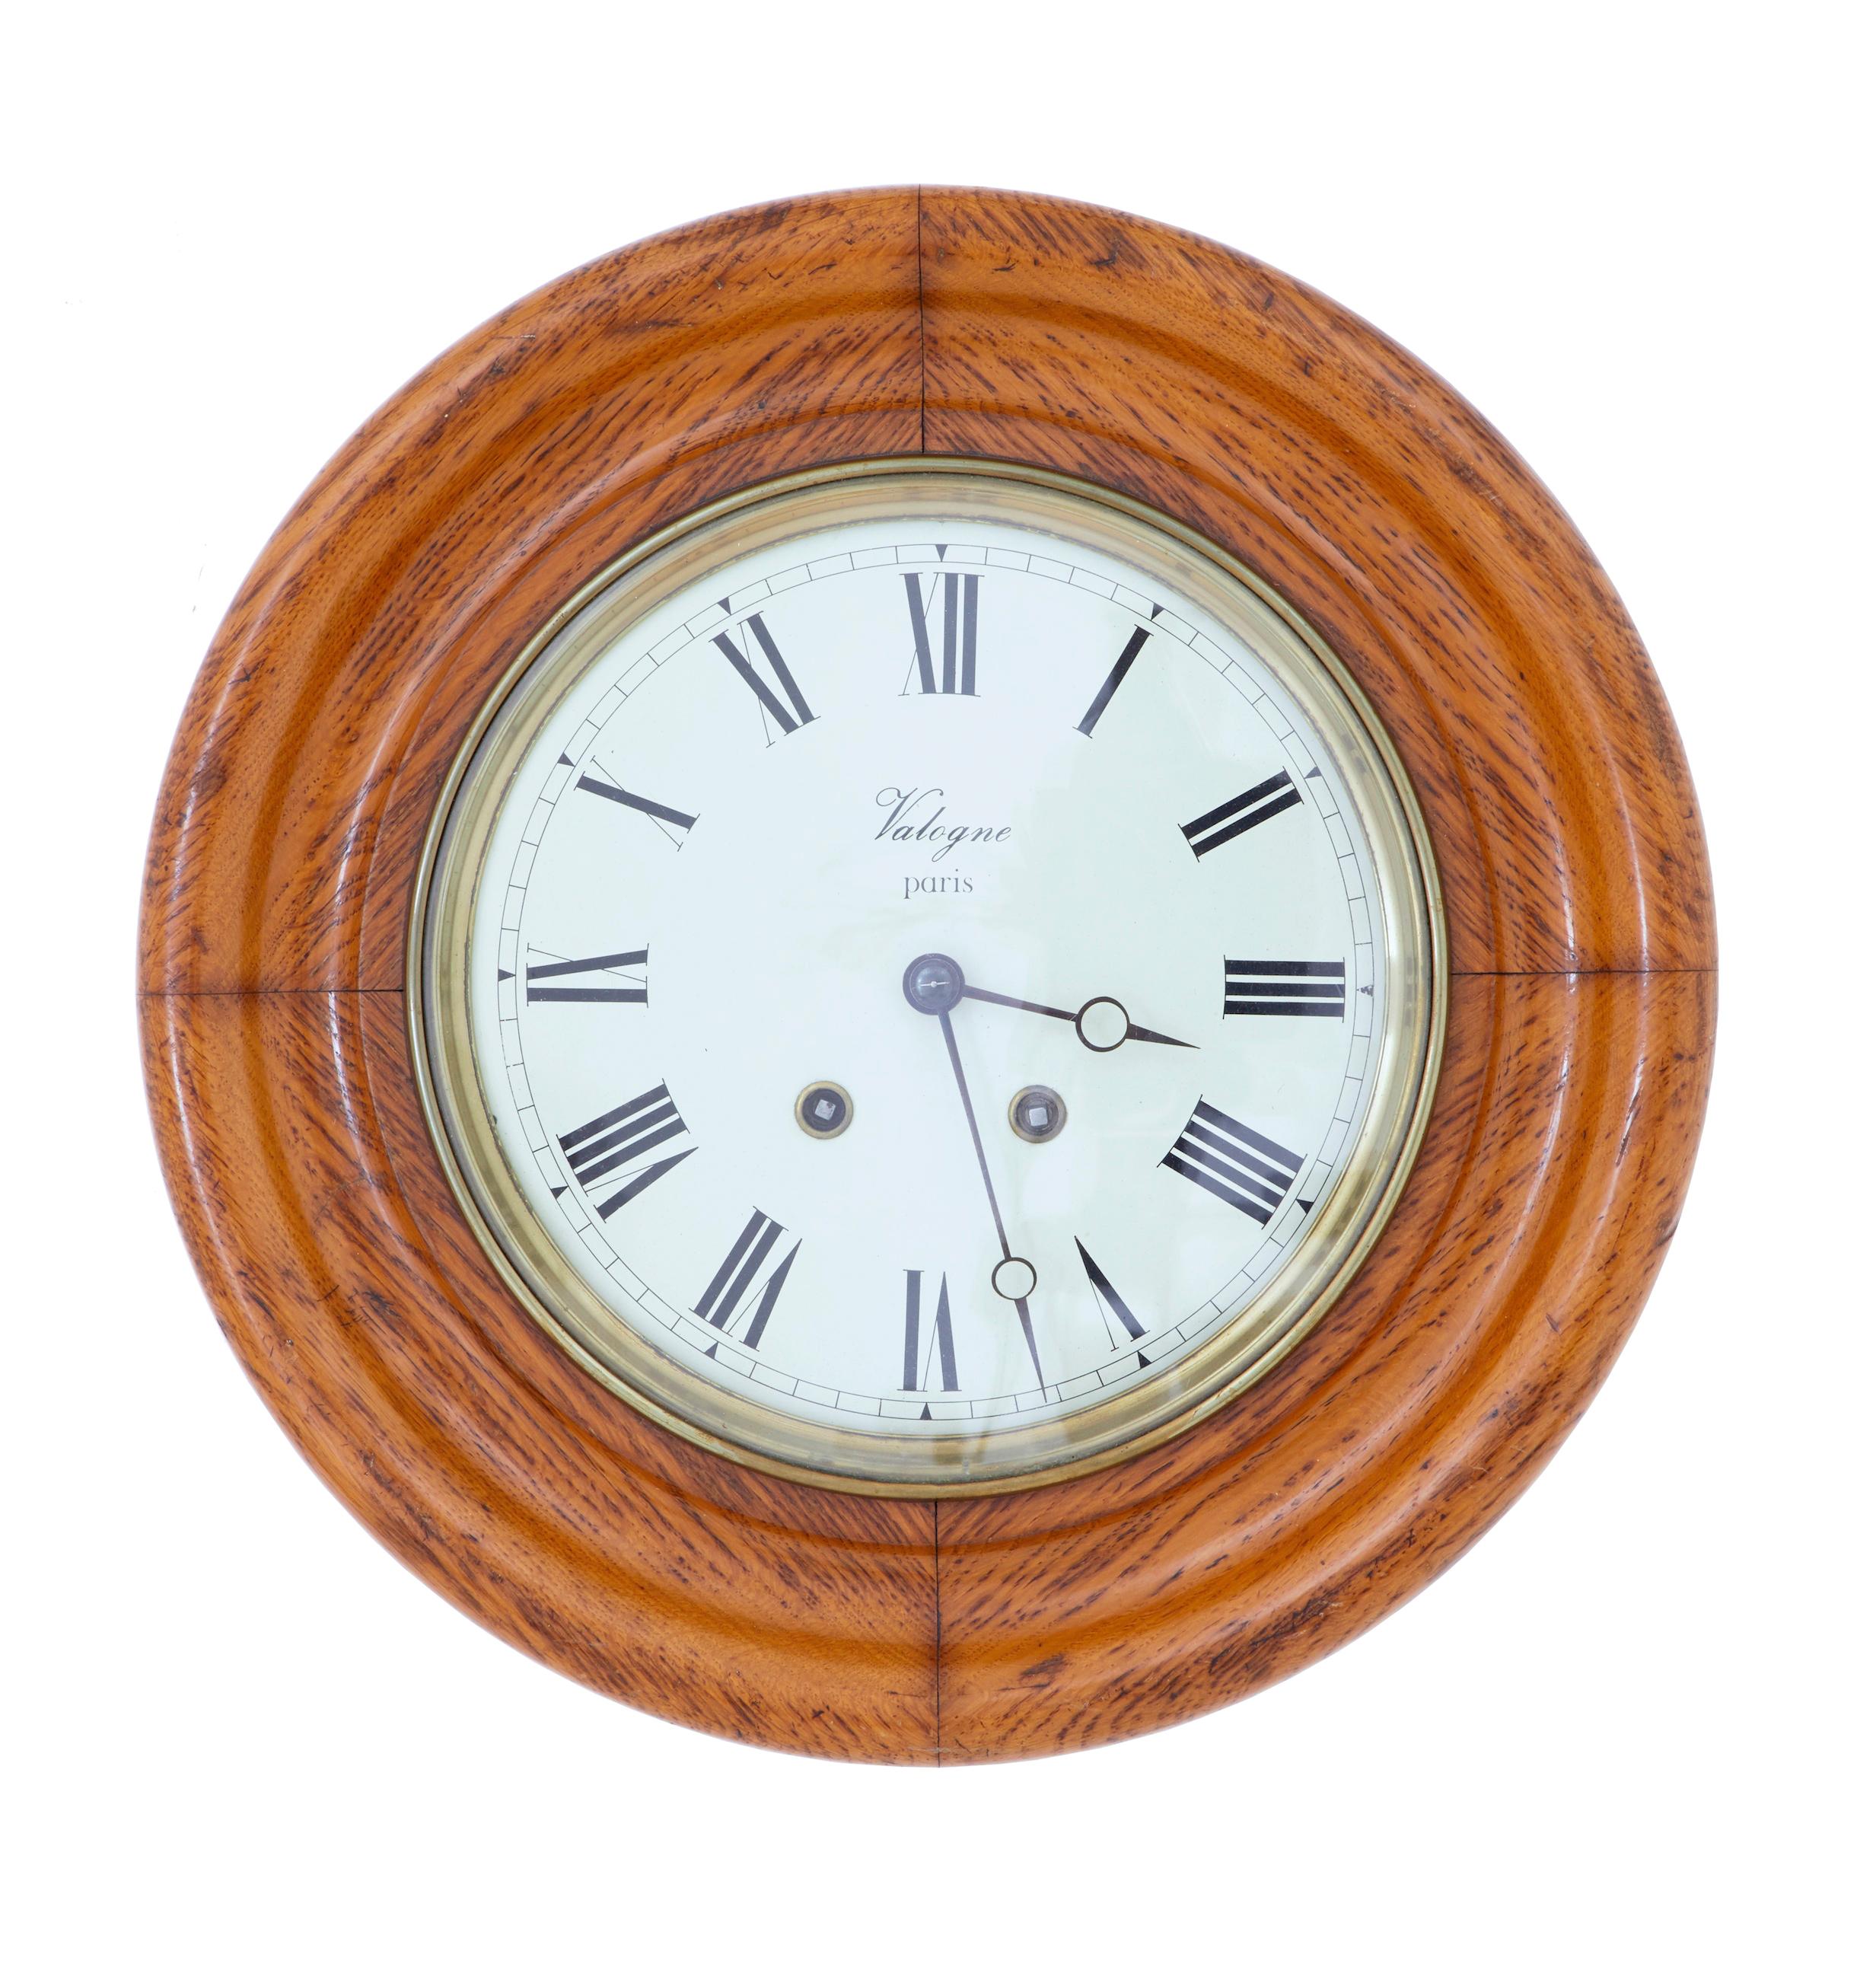 19th century French oak Japy Freres wall clock valogne, Paris, circa 1890.

Solid oak case, white enamel dial with roman numerals with the Parisian superb of Paris on the dial. Fitted with a stamped japy freres movement.

Glazed door with brass